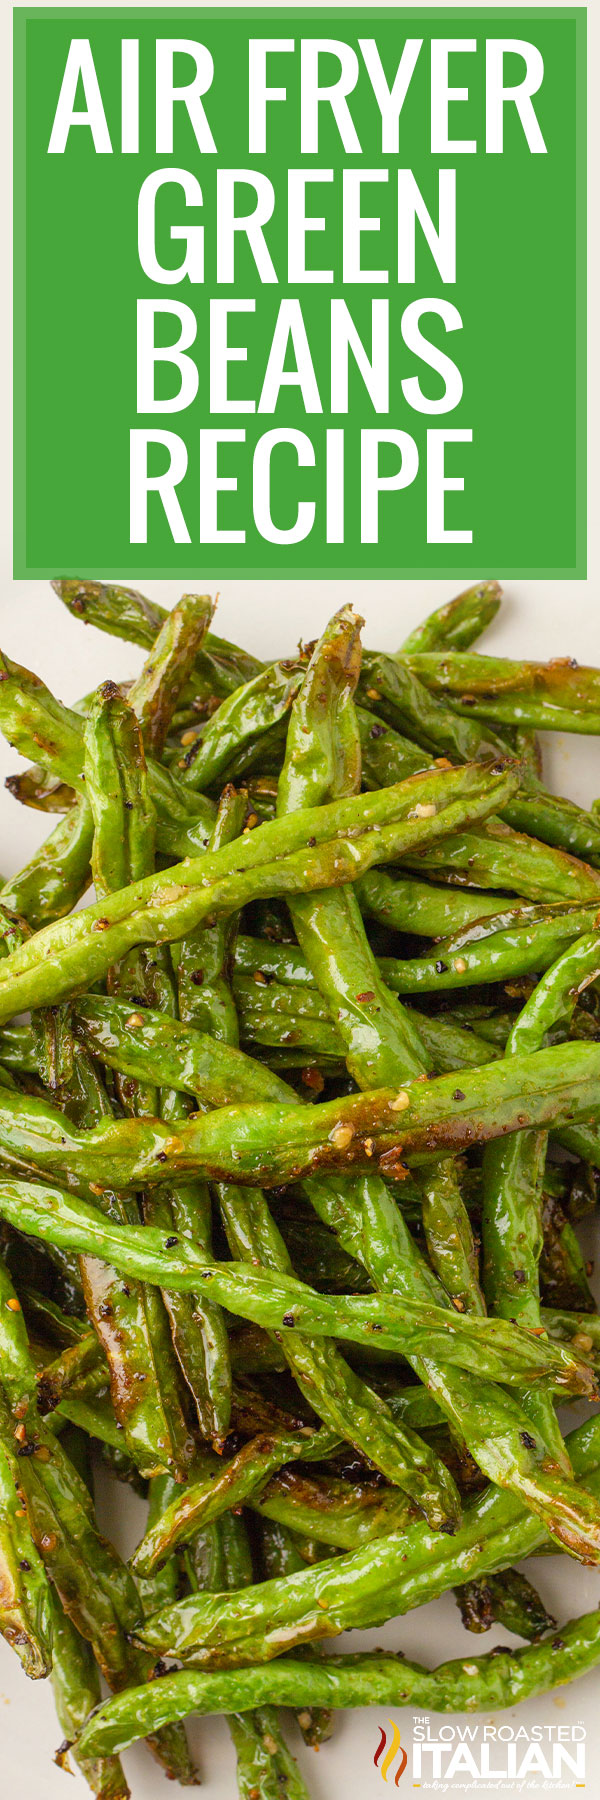 titled image (and shown): air fryer green beans